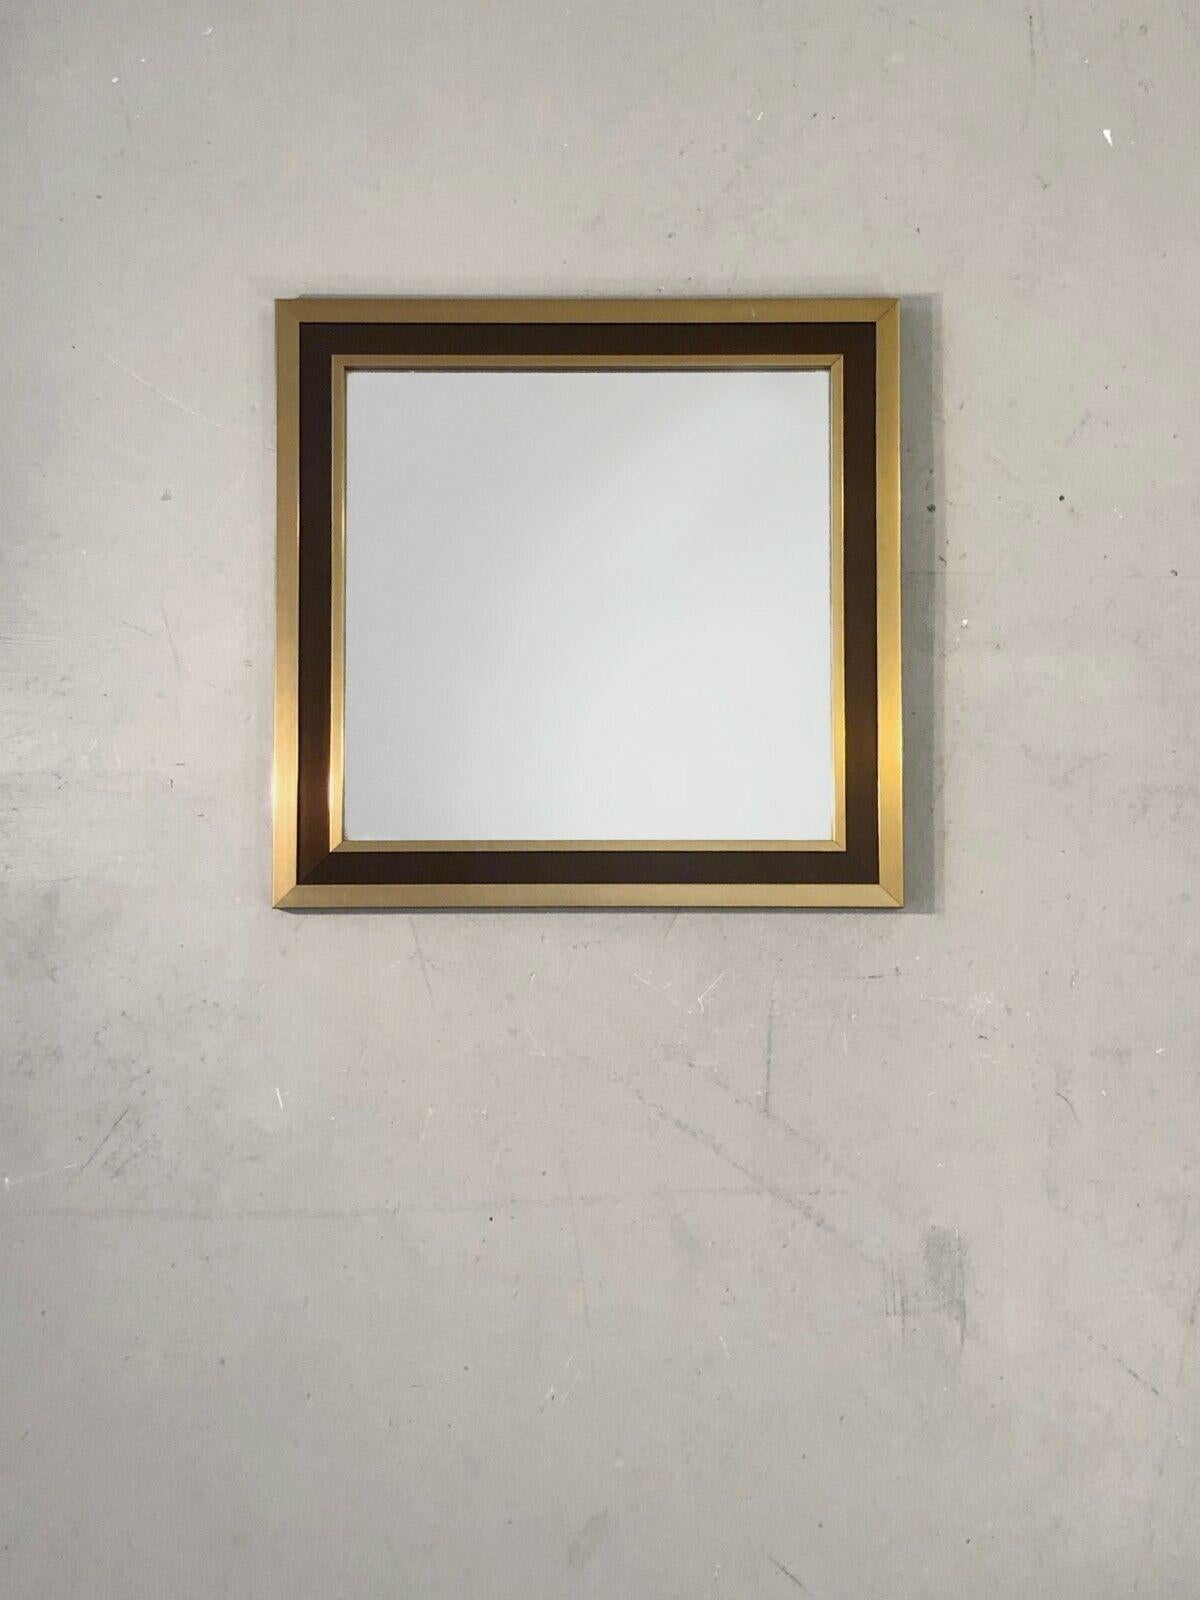 An elegant small square wall mirror of excellent quality, Post-Modernist, Memphis, Shabby-Chic, with a square section frame in gold and brown metal, varnished, to be attributed, France 1970.

DIMENSIONS: 36.5 x 36.5 x 2 cm

CONDITION: In very good